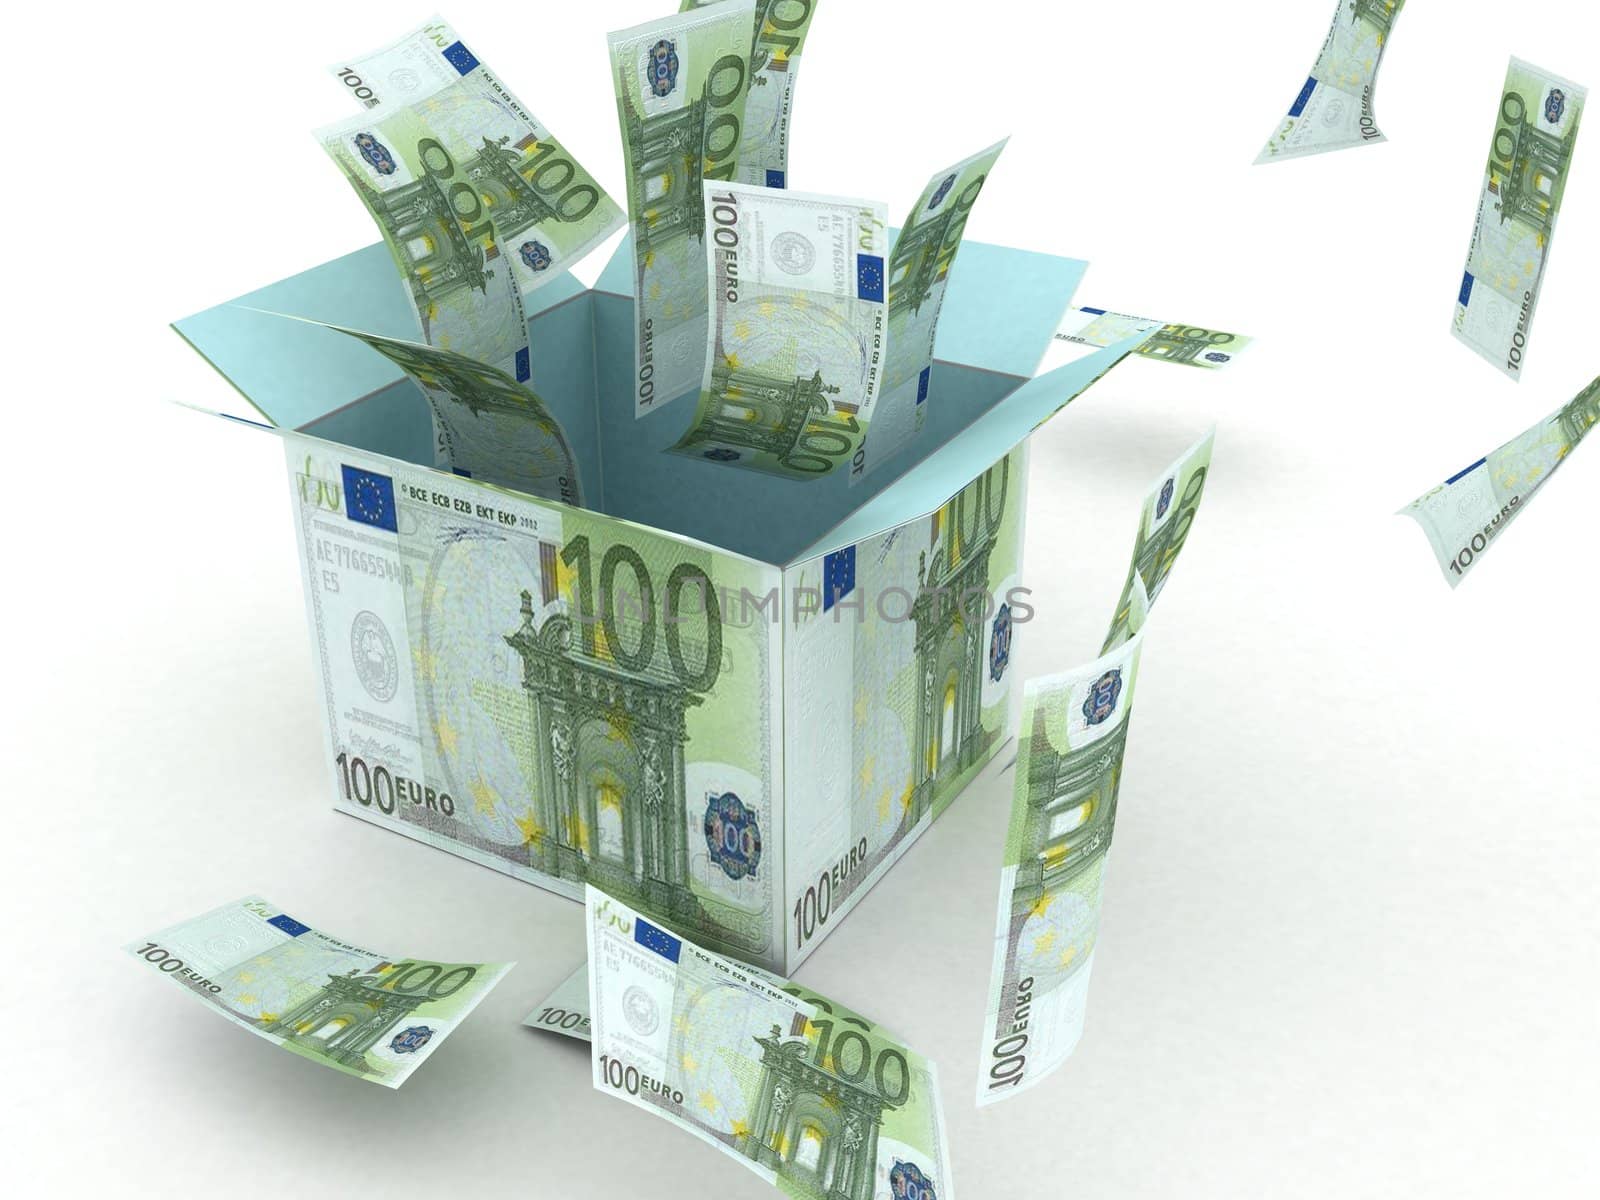 three dimensional gift box opened with 100 euro bills flying in the air on an isolated white background

